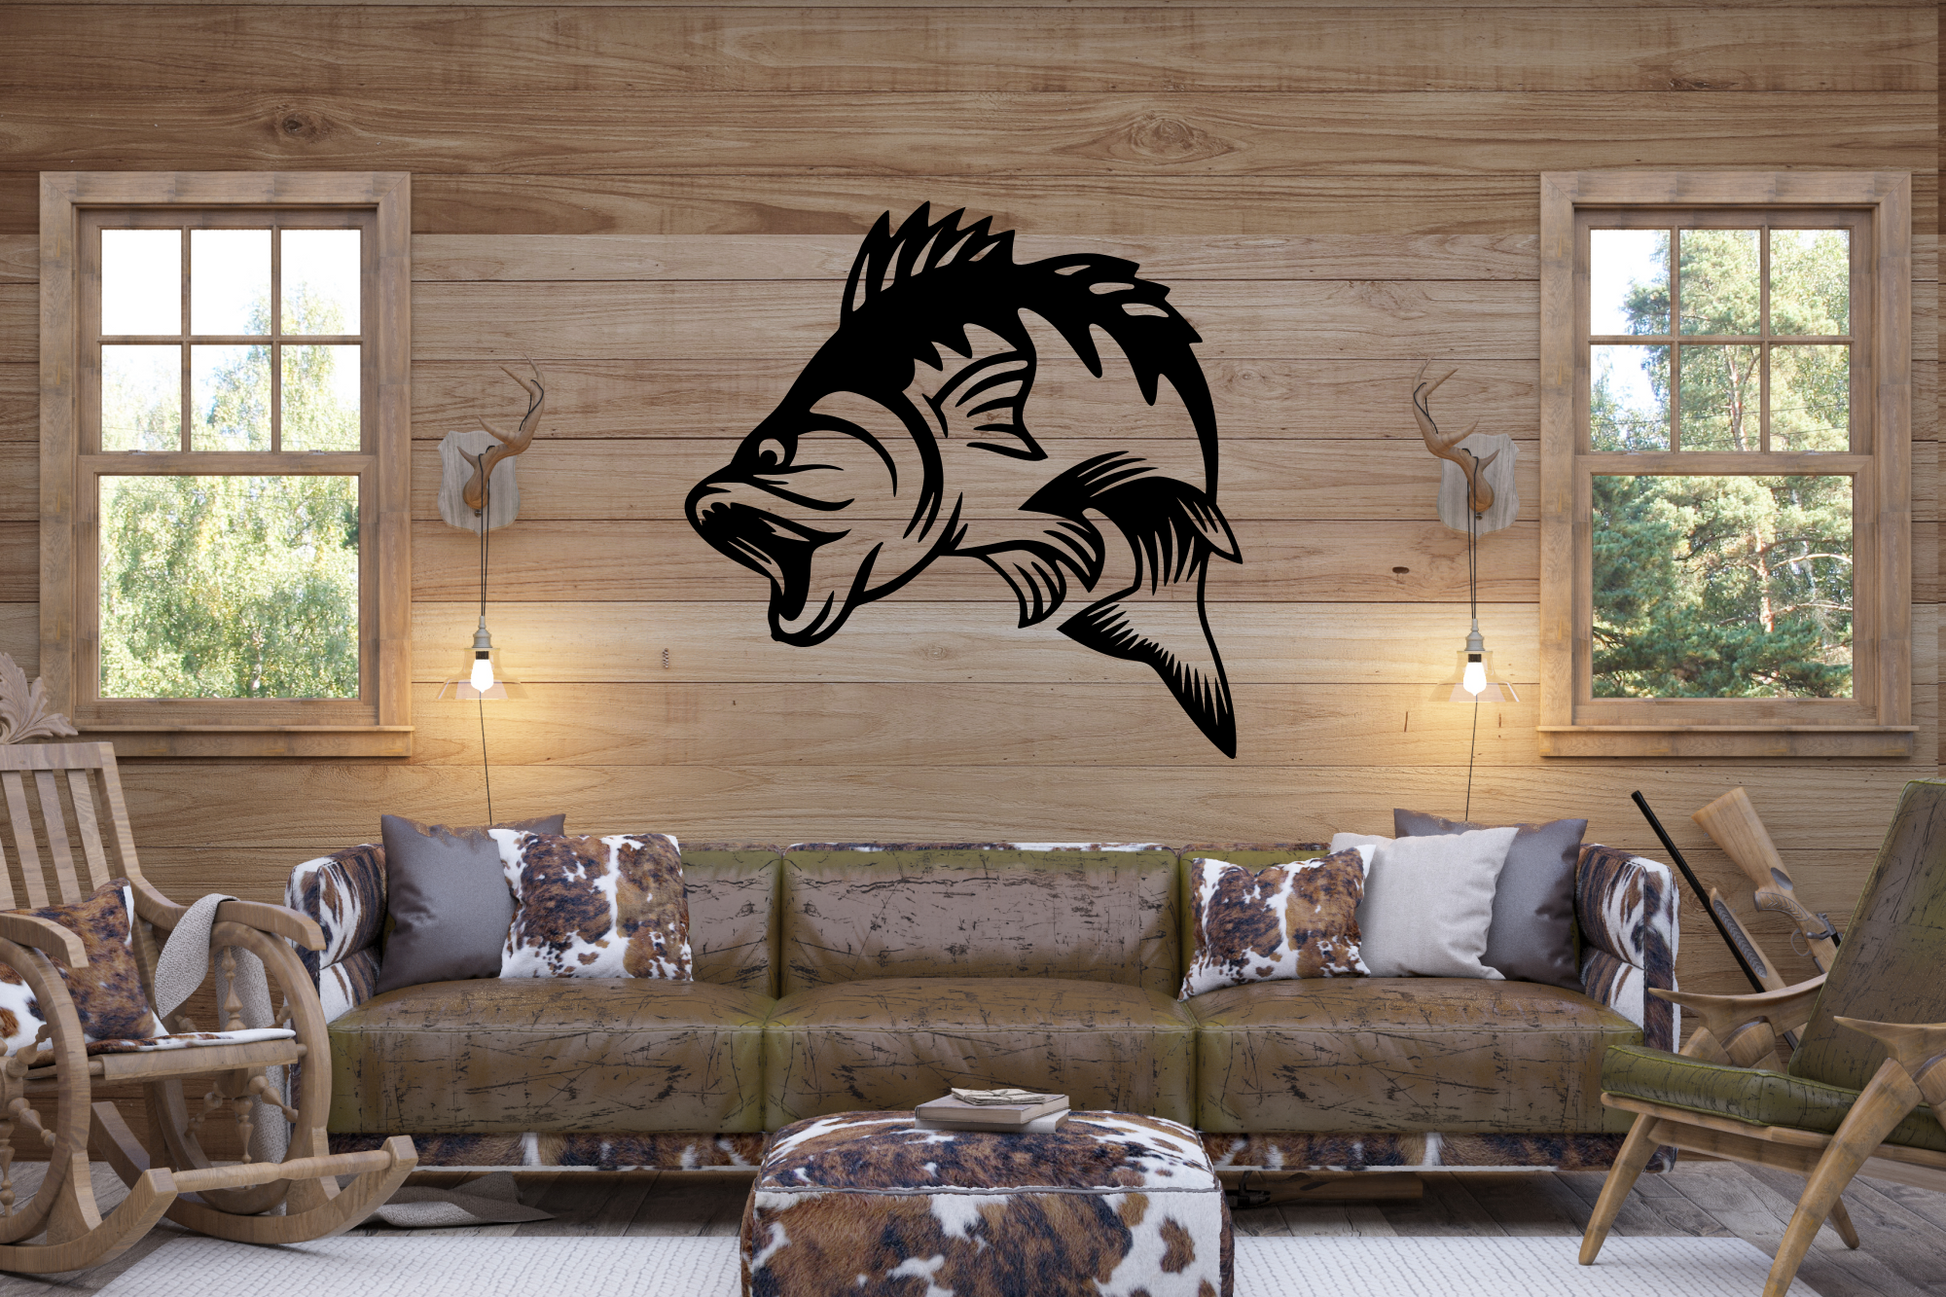 METAL FISH ART, 2 Sizes, Small Mouth Bass, Outdoor Metal Wall Art